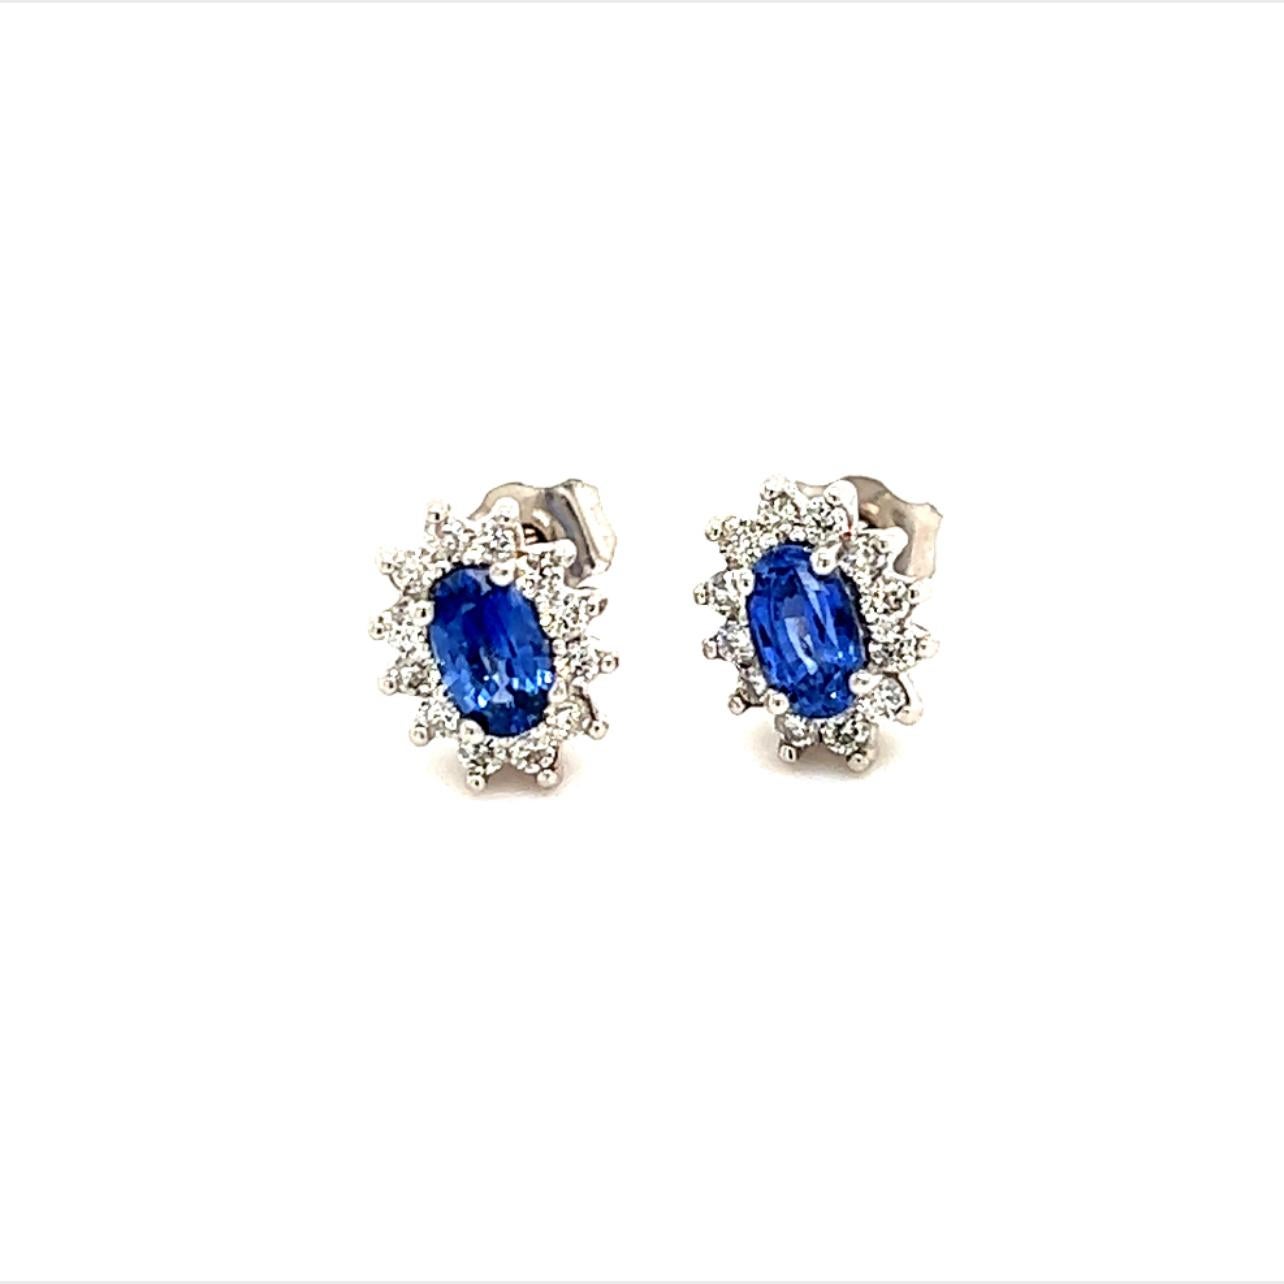 Natural Sapphire Diamond Stud Earrings 14k Gold 0.90 TCW Certified For Sale 1